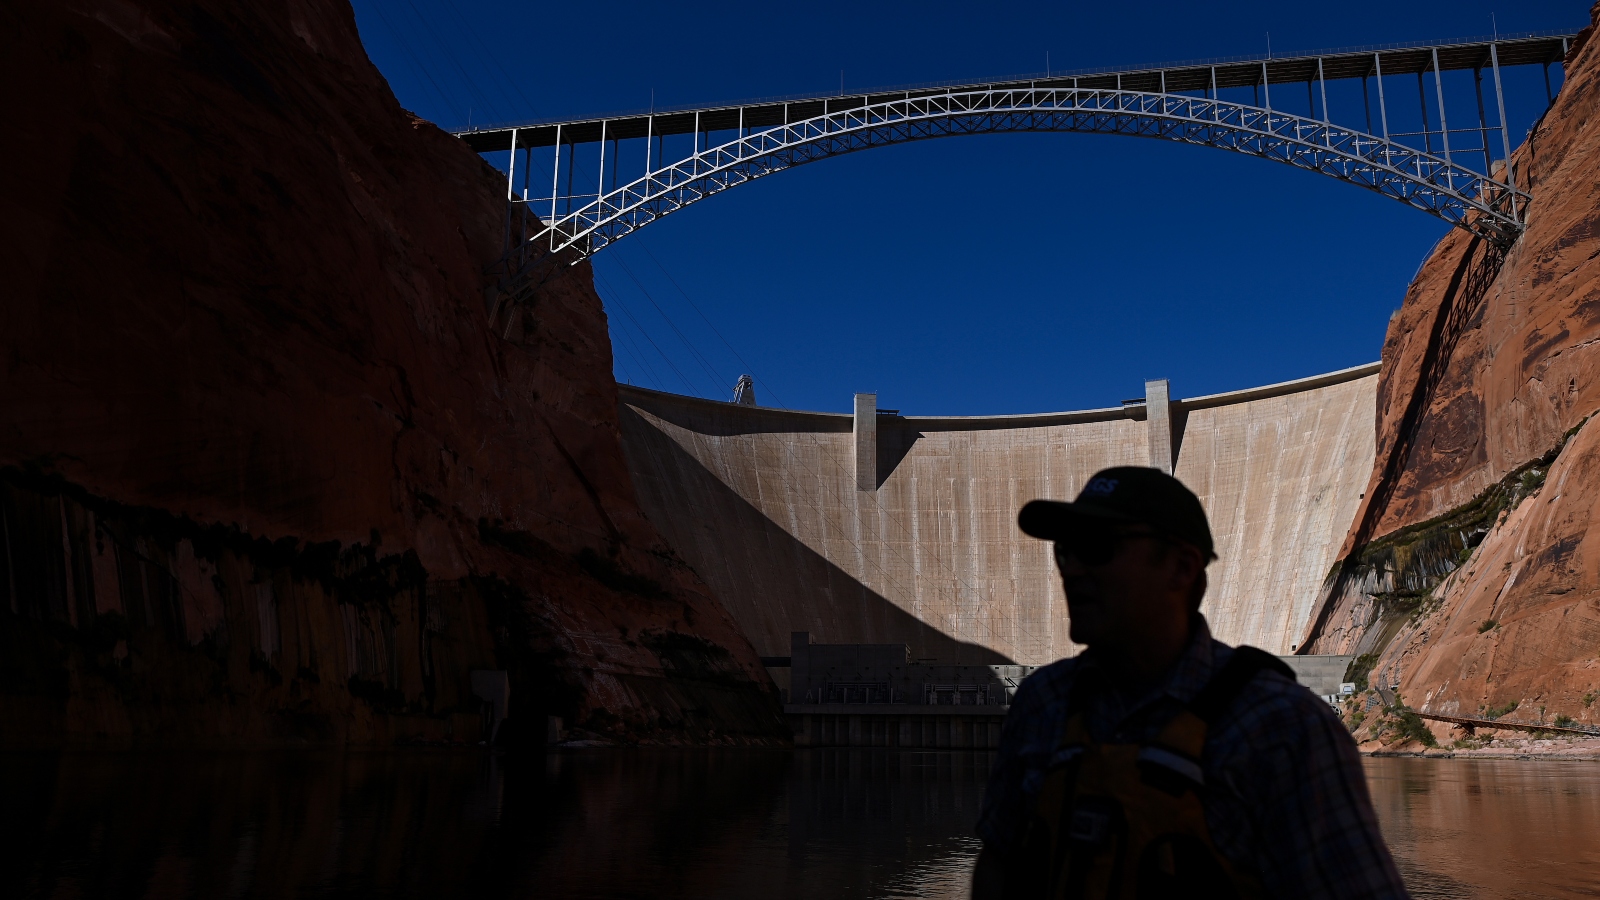 Research ecologist Ted Kennedy drives his boat along the Colorado River as the Glen Canyon Dam is seen in the background.